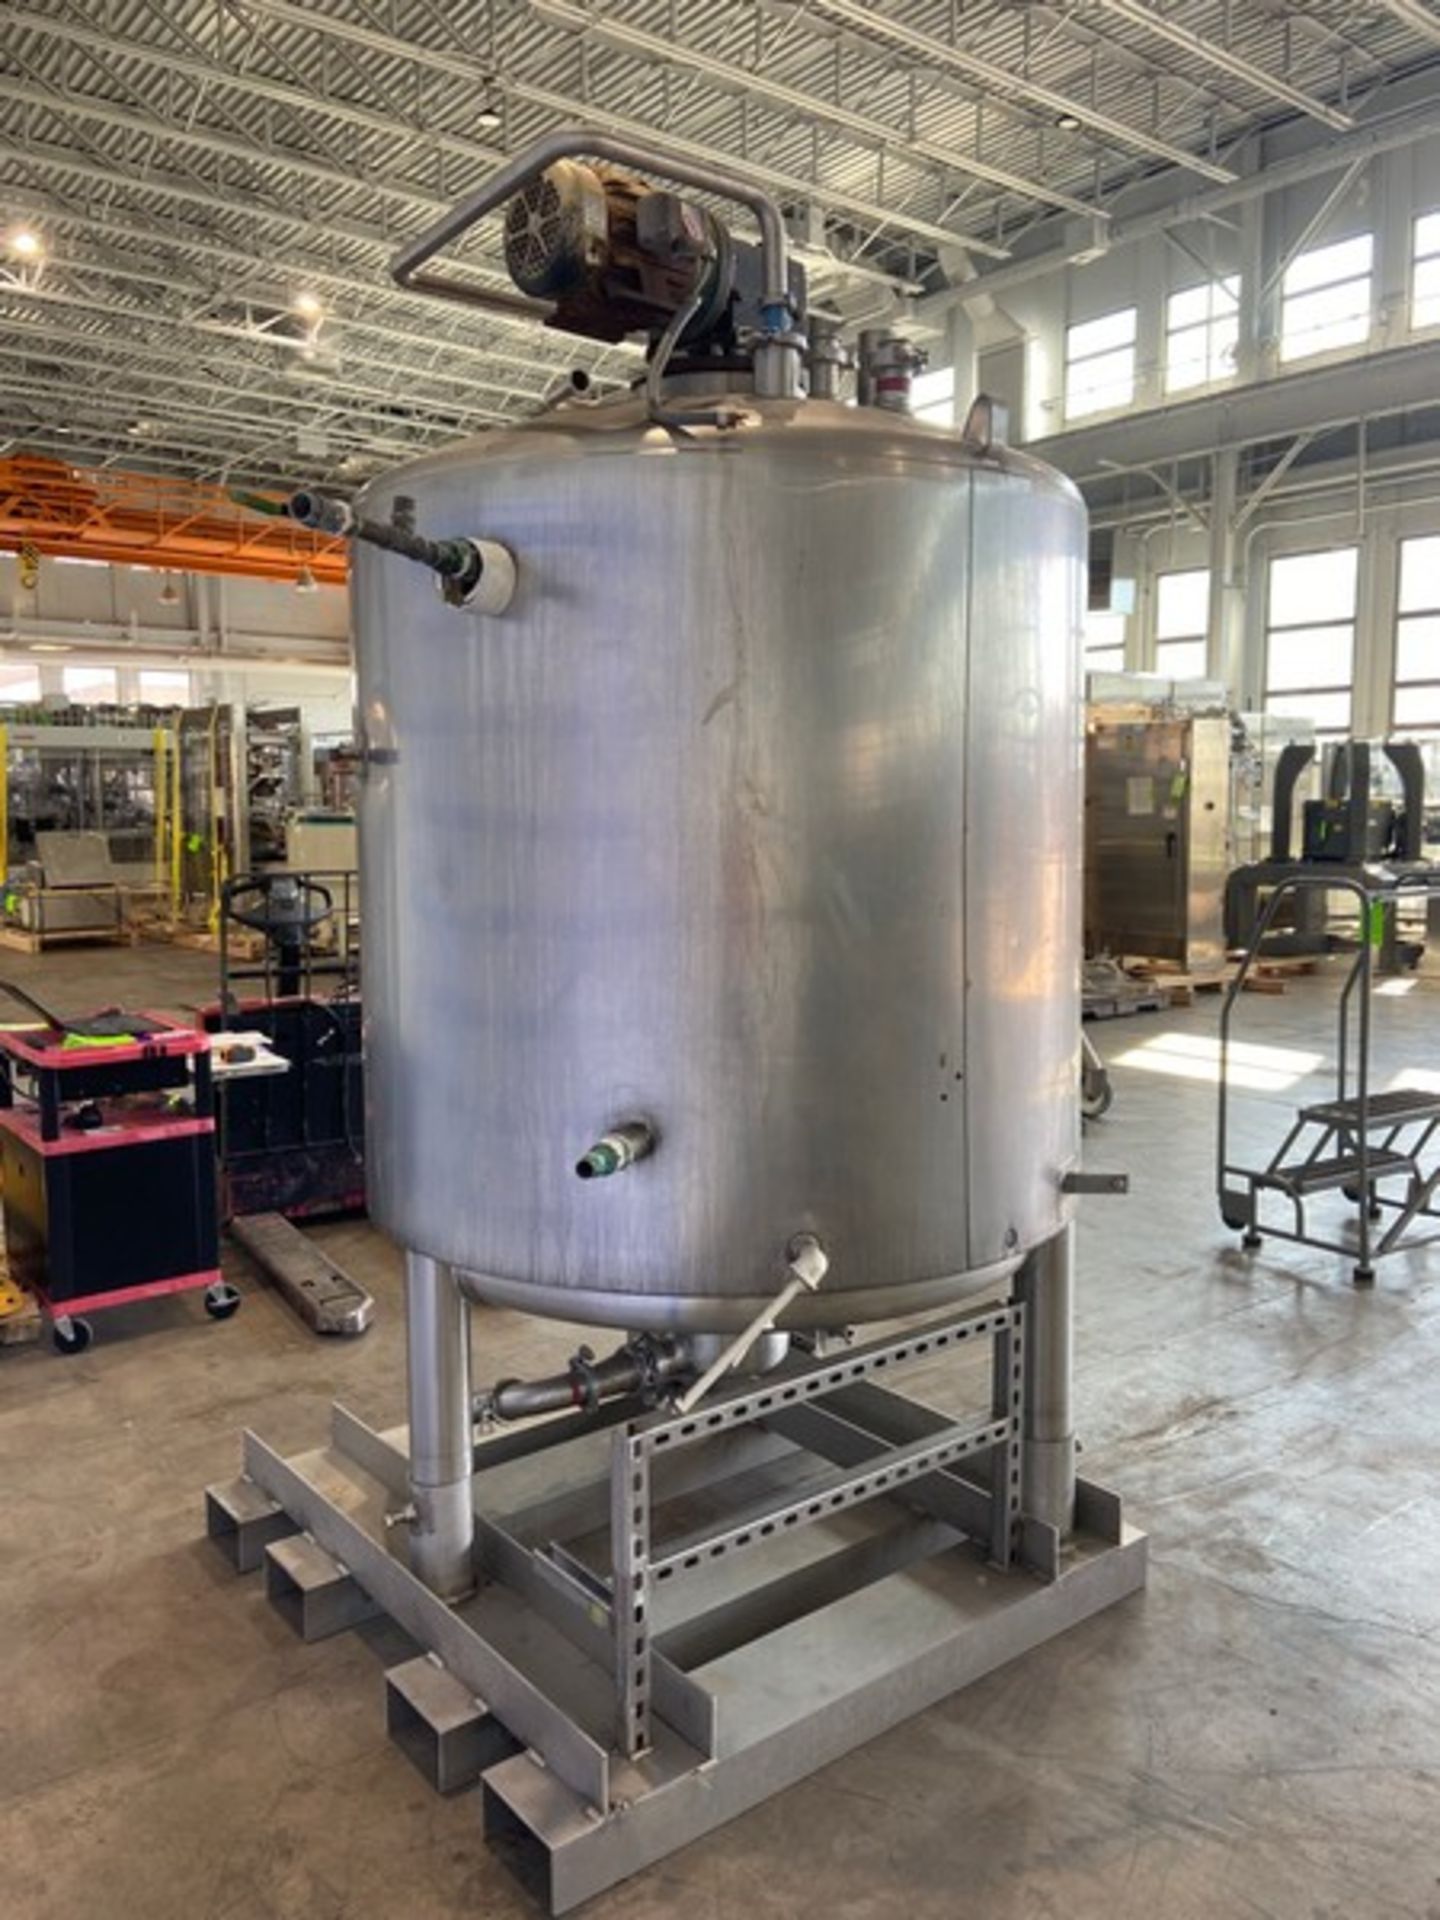 Mueller Aprox. 500 Gal. Jacketed S/S Tank,Internal Dims.: Aprox. 55" Tall x 52" Dia., with CIP Spray - Image 3 of 13